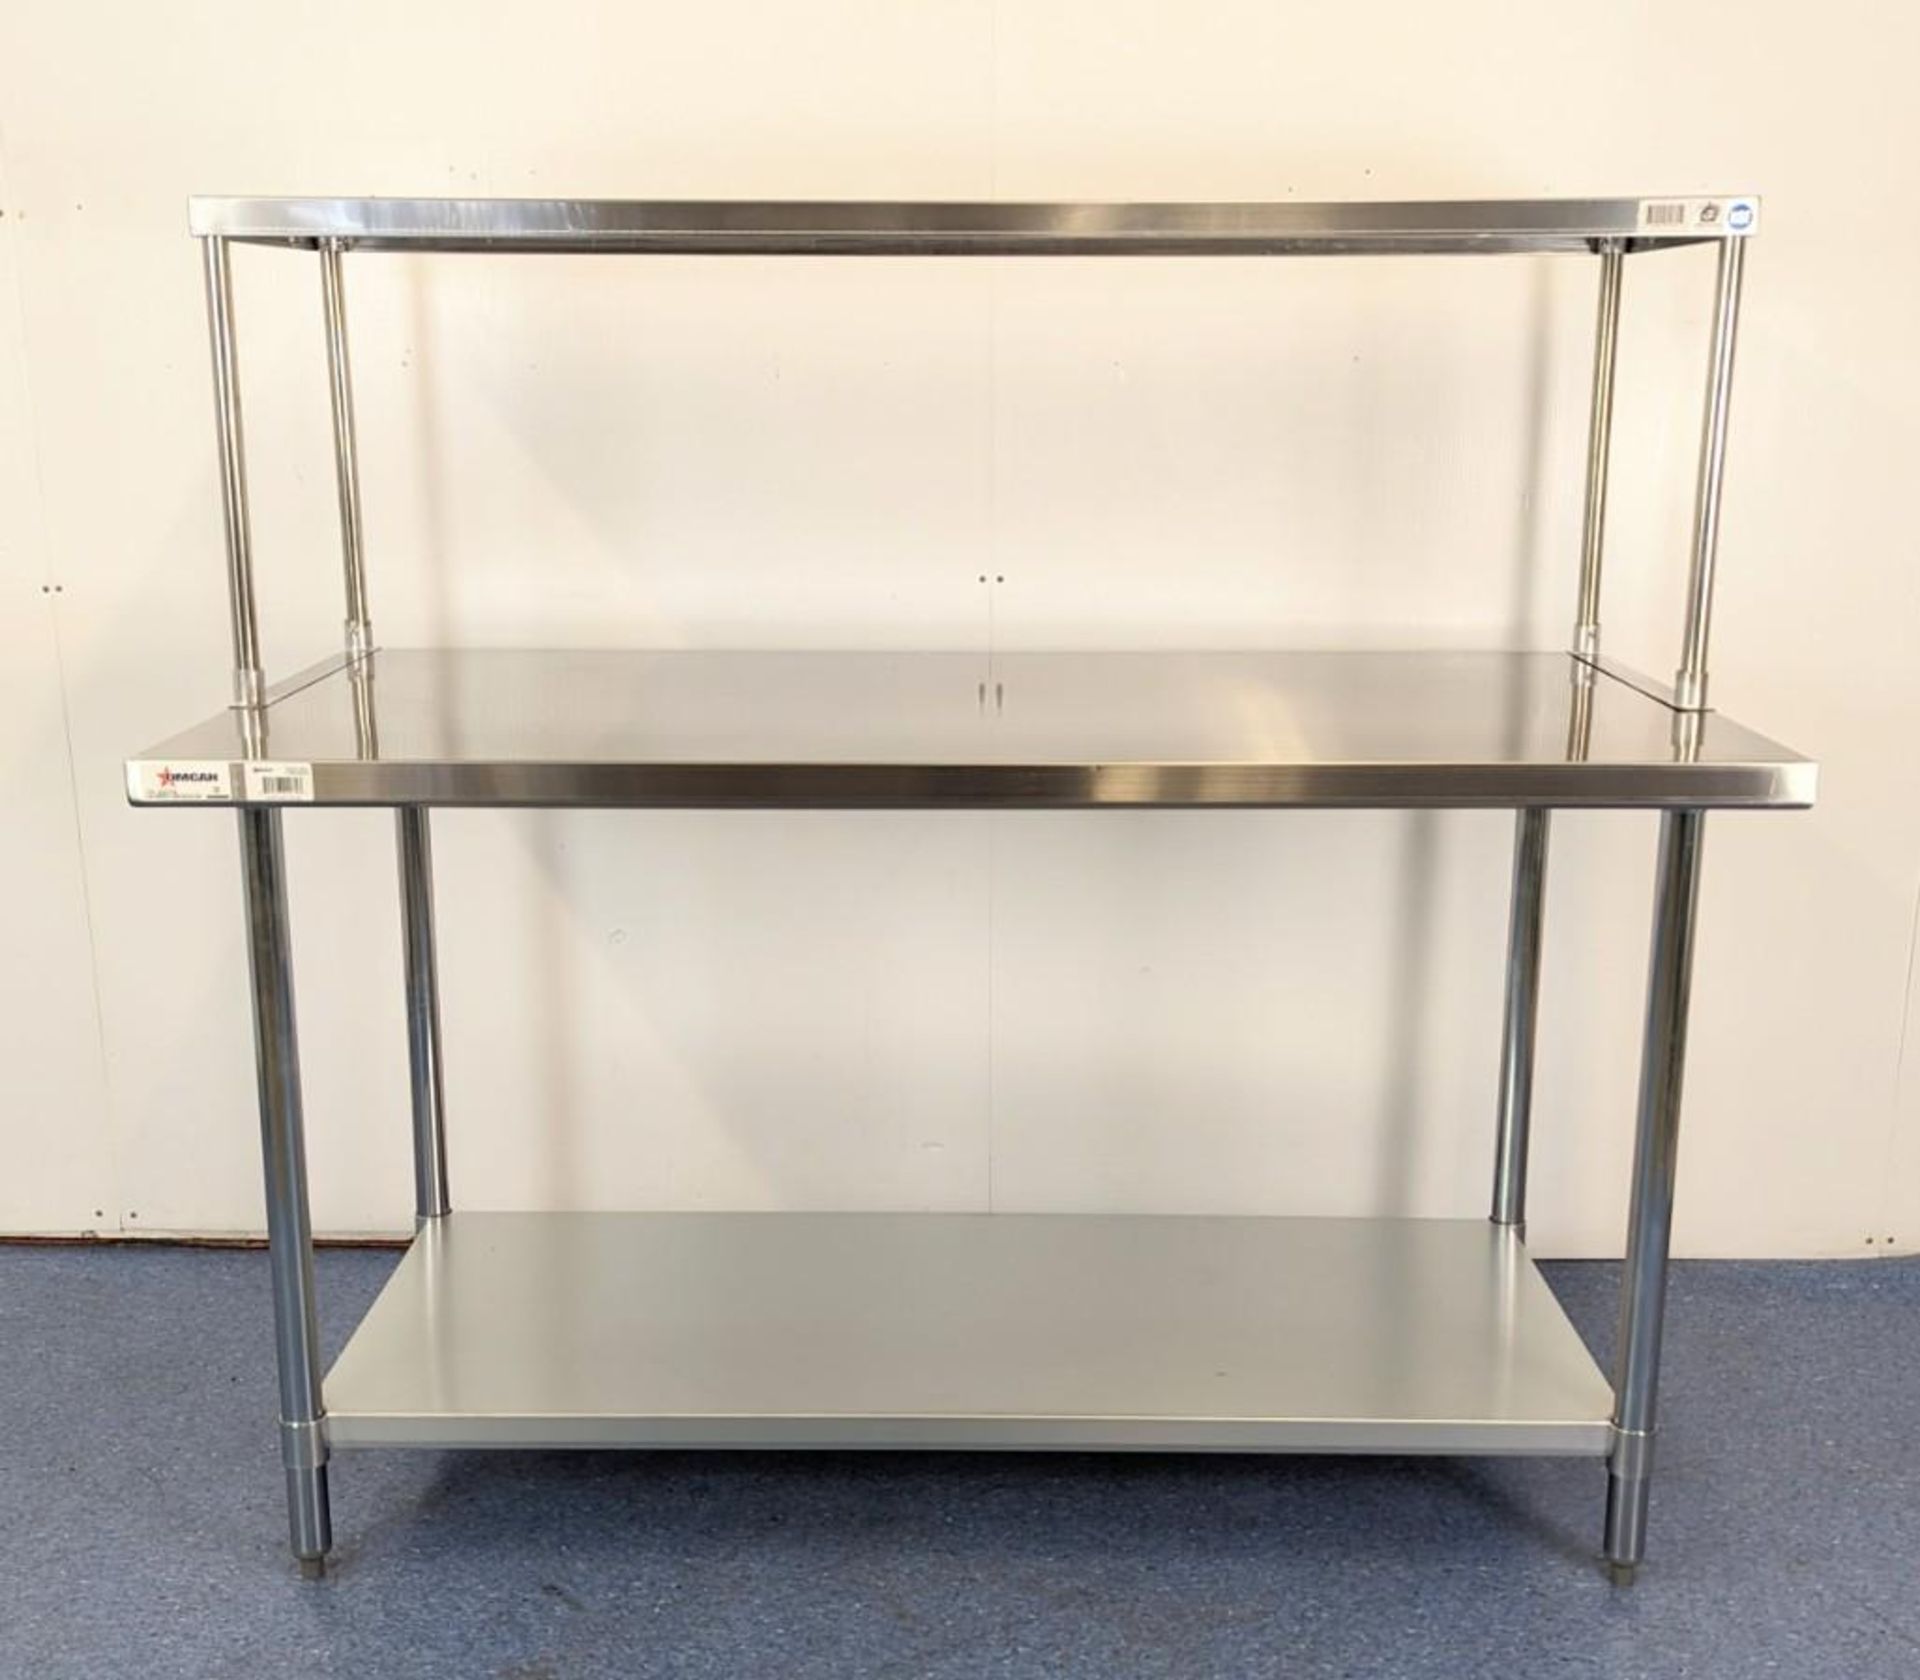 NEW 30" X 60" STAINLESS WORK TABLE WITH 18" SINGLE OVERSHELF - Image 2 of 8